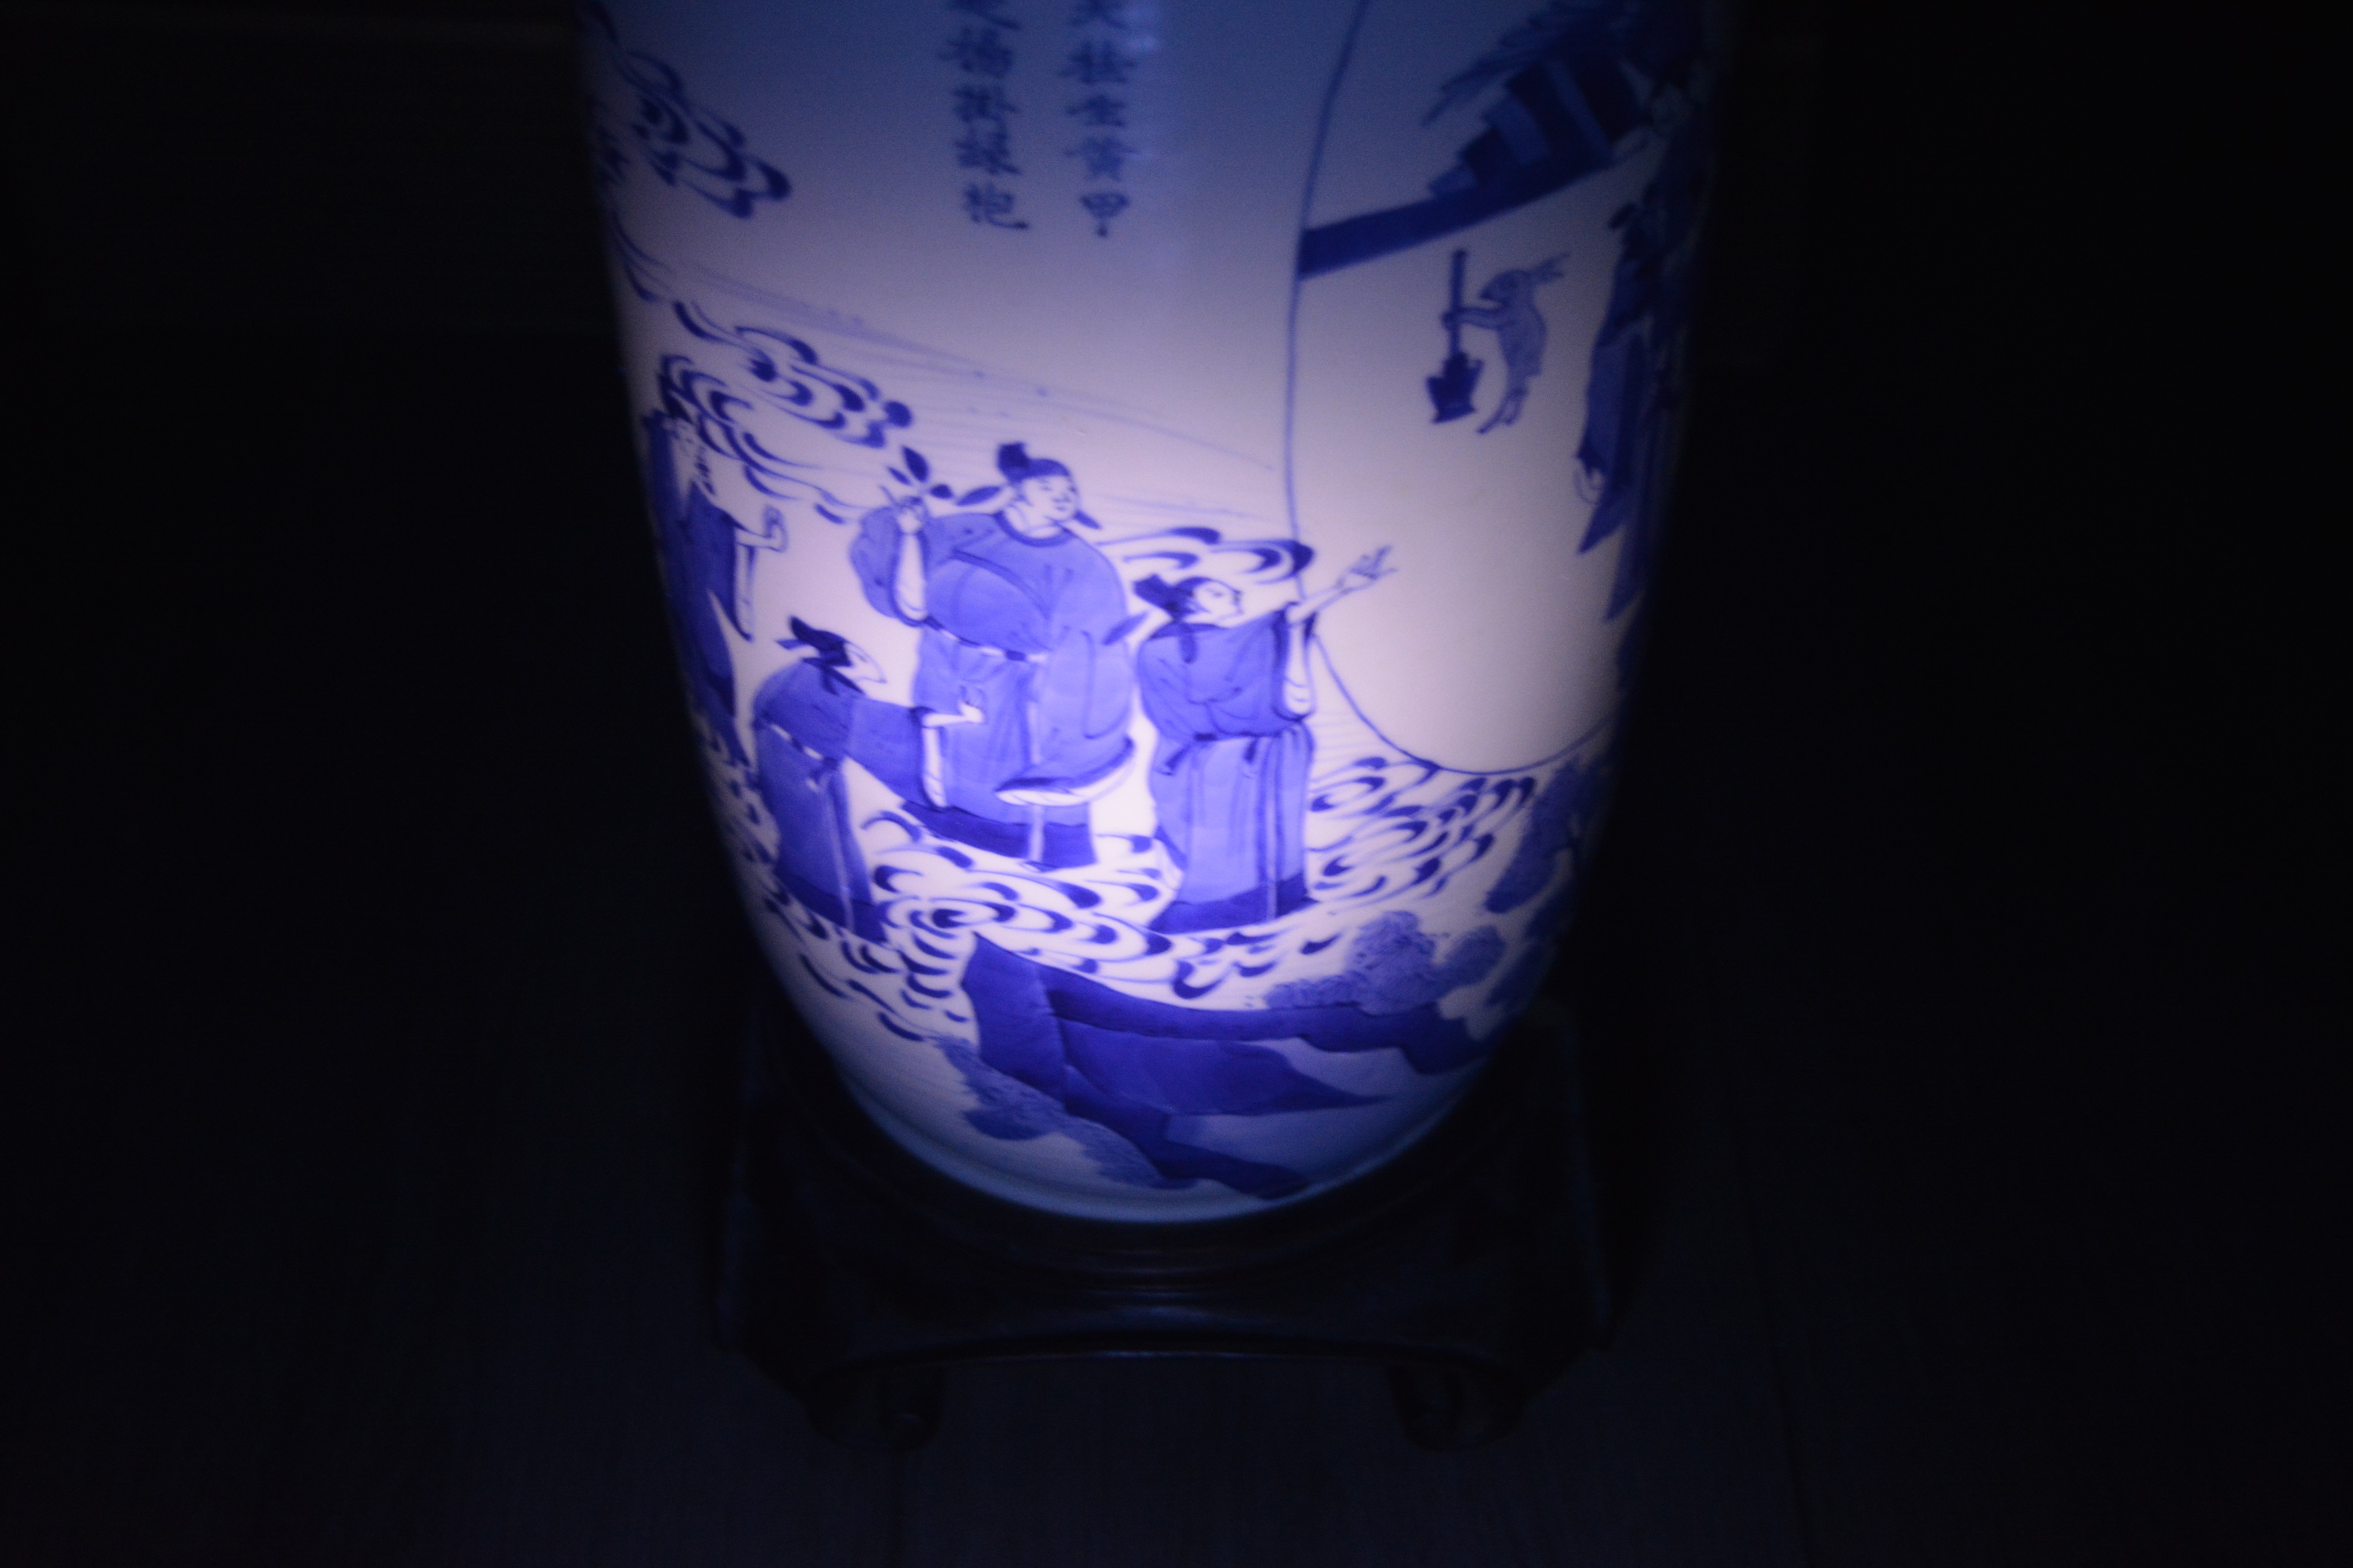 Blue and white porcelain rouleau vase Chinese, Kangxi painted with scholars, clouds, and figures - Image 33 of 33